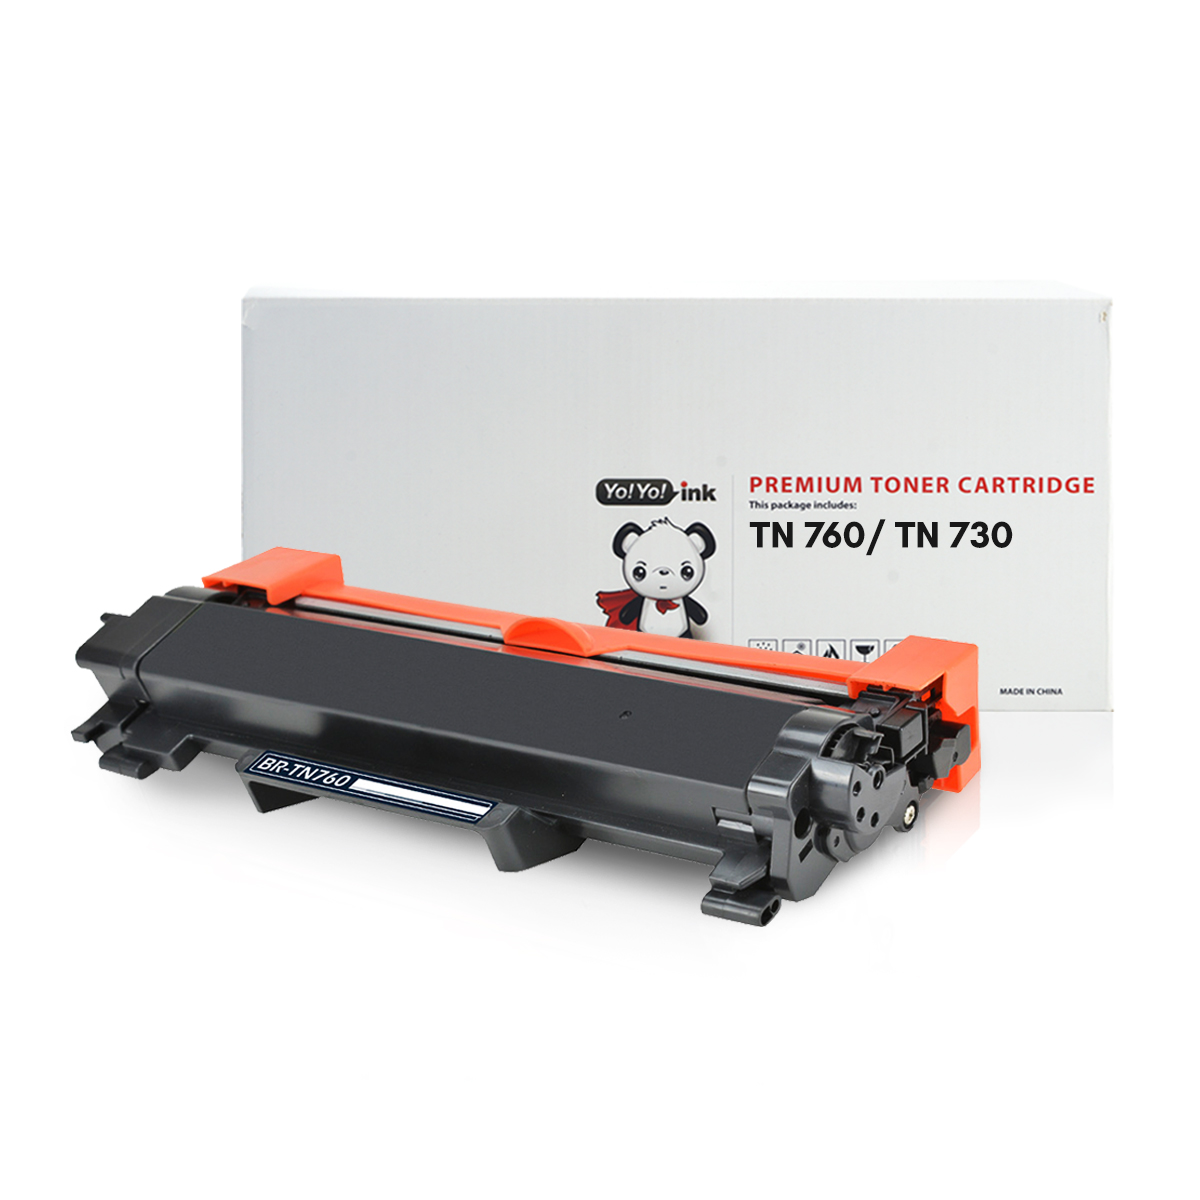 Brother TN 760 Black High Yield Toner Cartridge, Up to 3,000 Pages